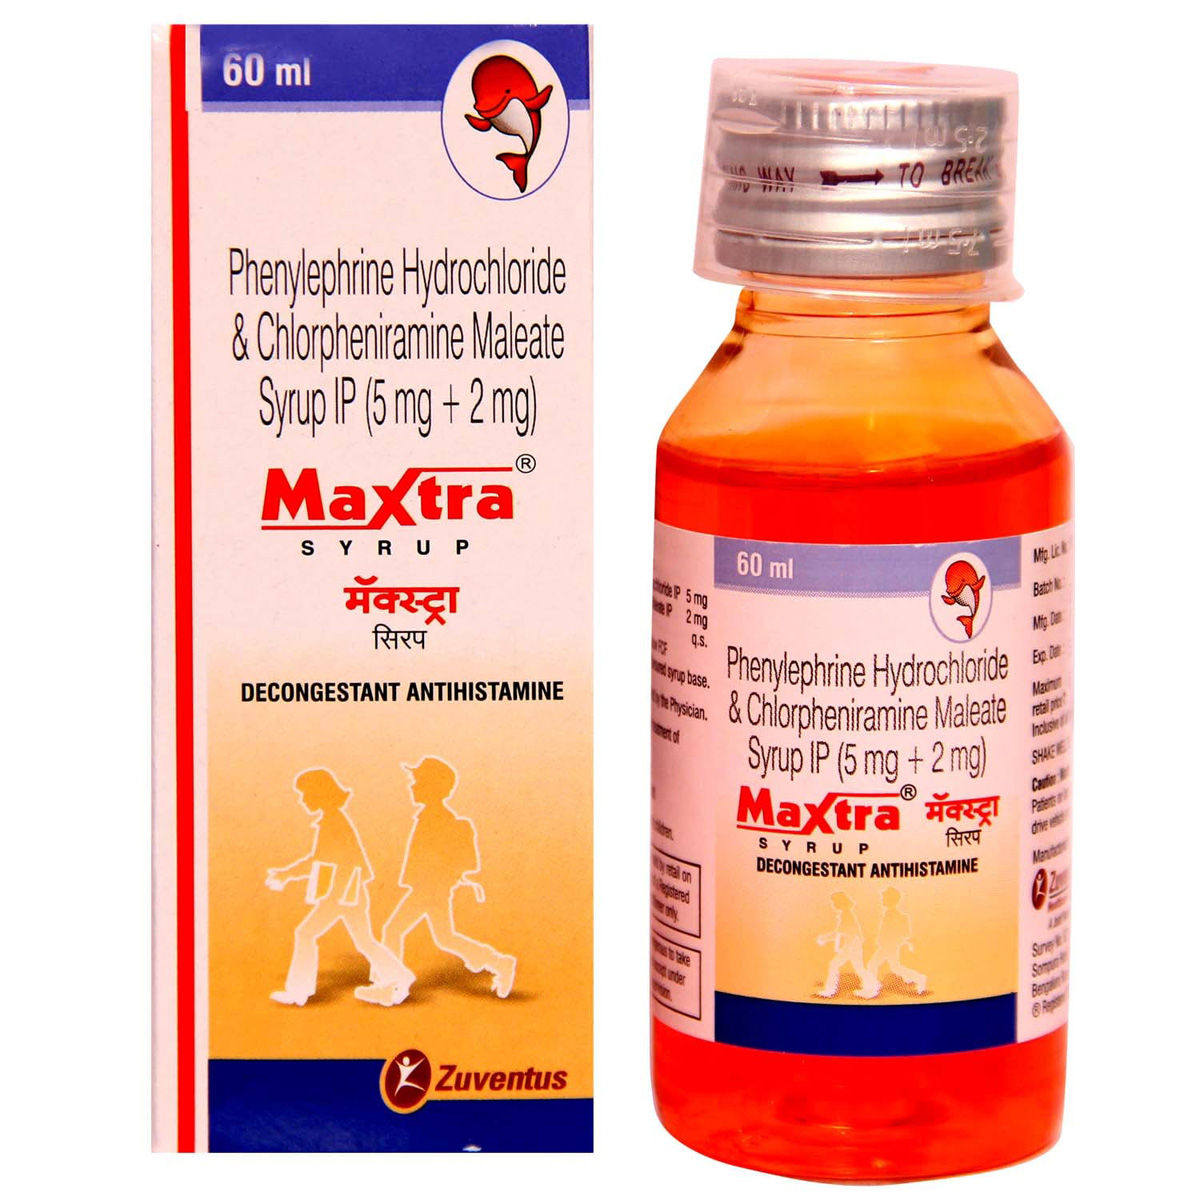 Maxtra Syrup 60 ml Price, Uses, Side Effects, Composition - Apollo Pharmacy